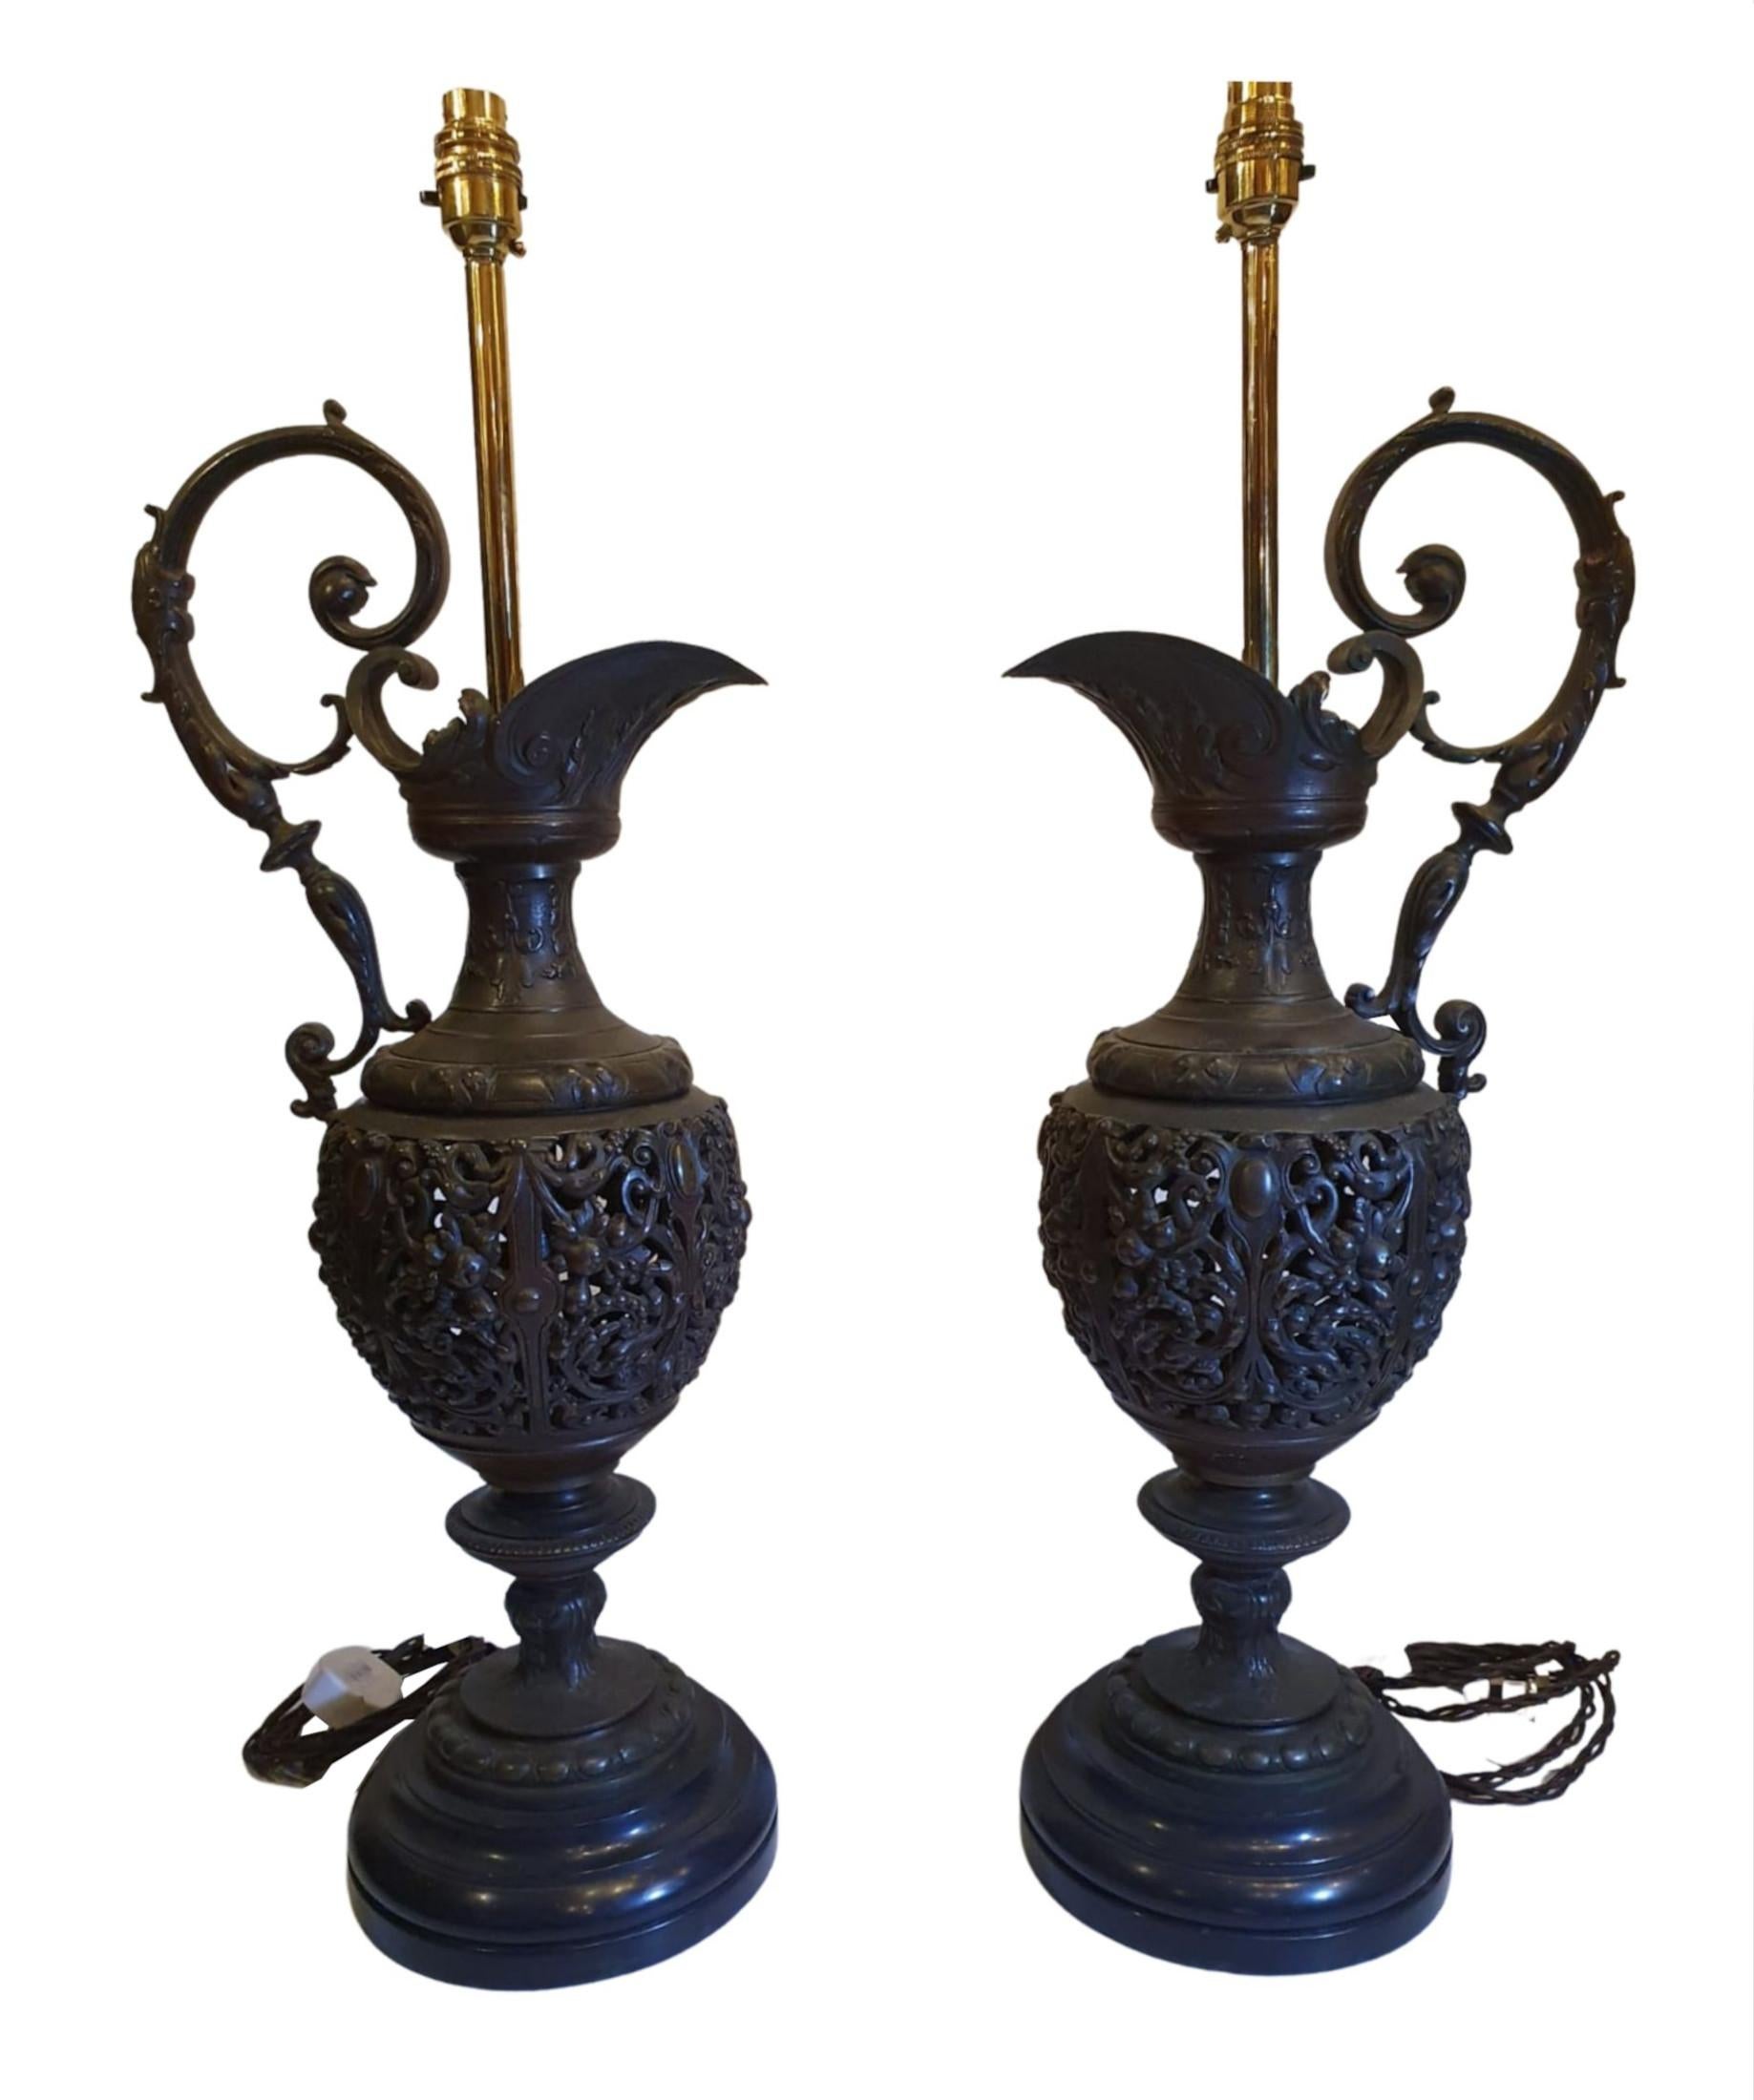 Rare Pair of 19th Century Bronze Ewers Converted to Table Lamps For Sale 1